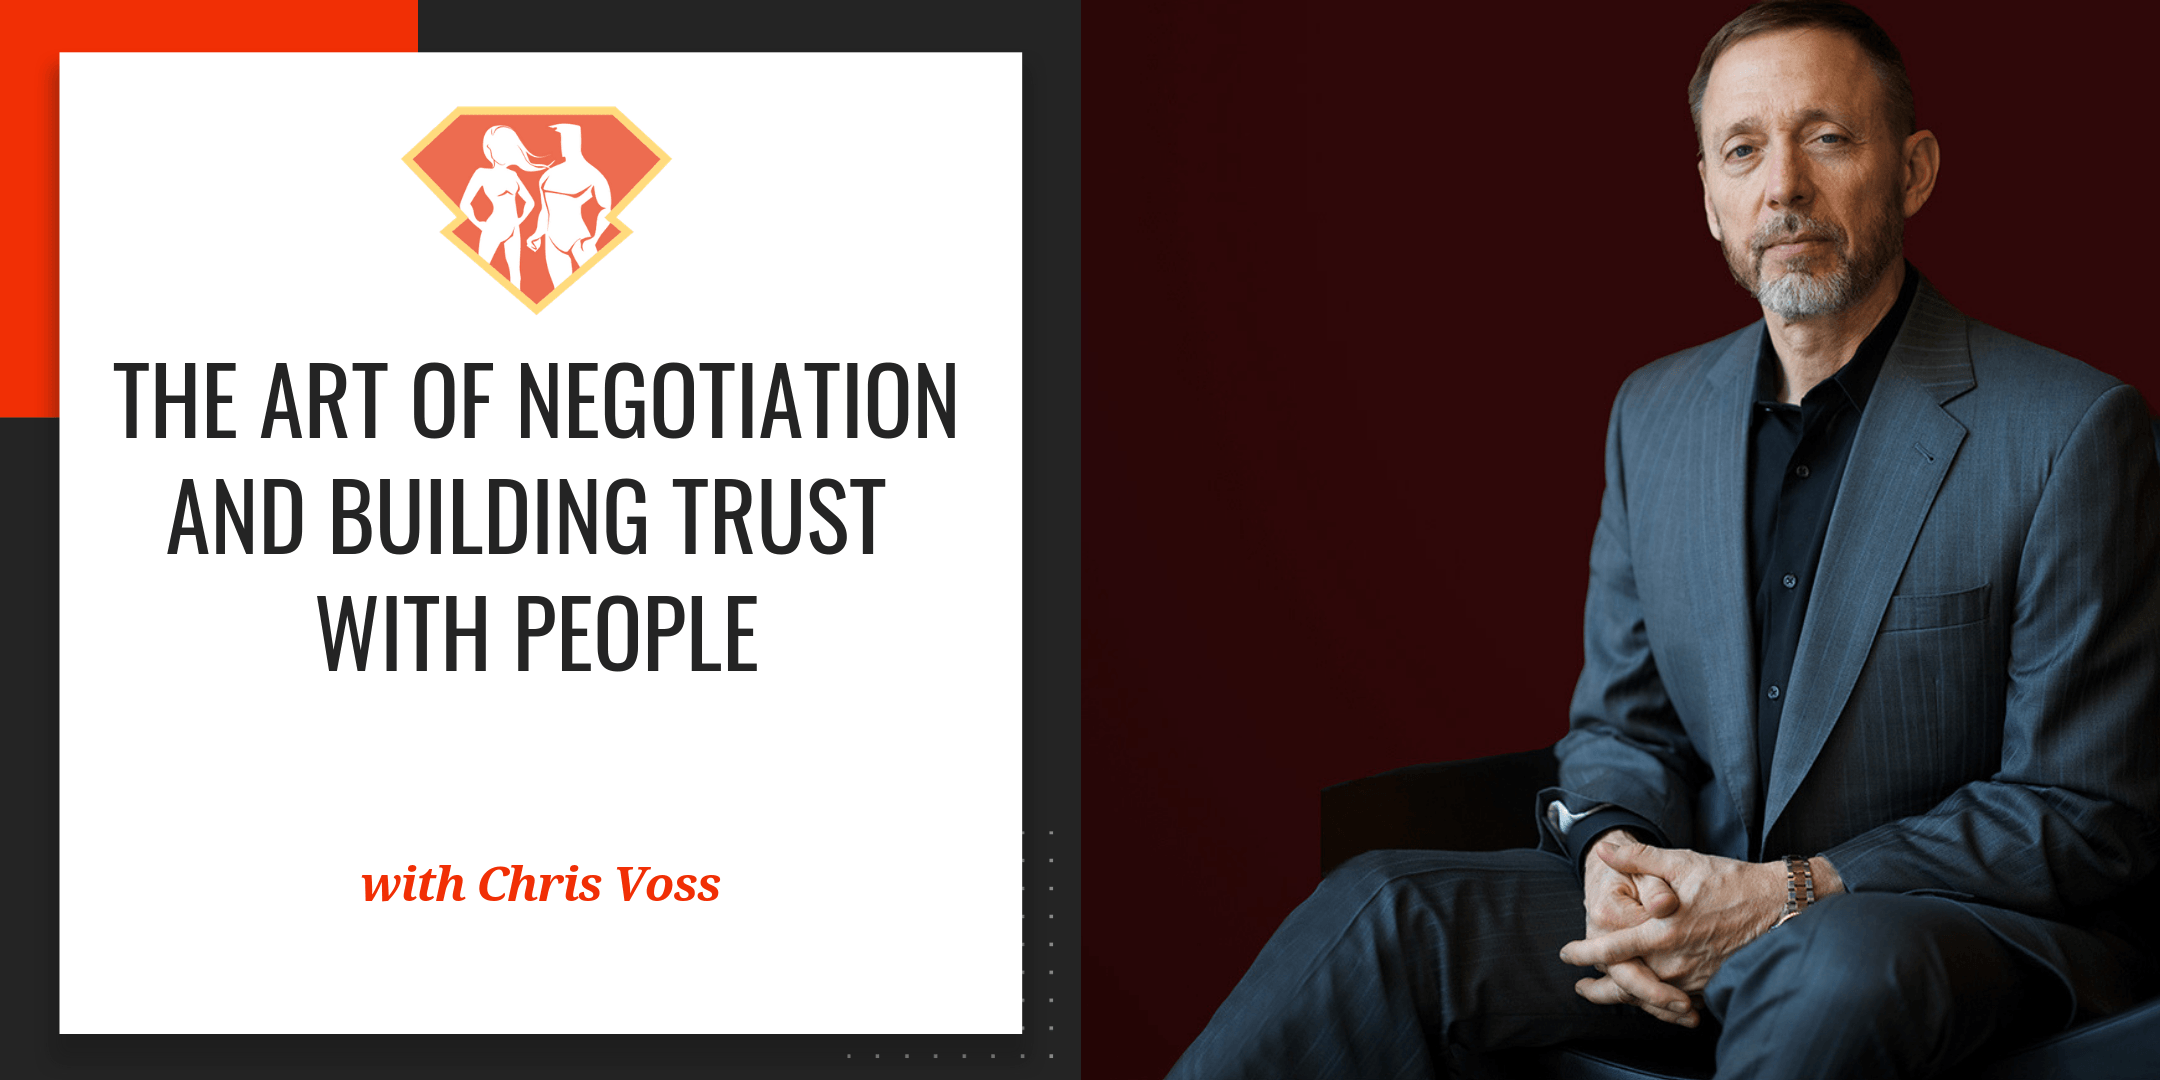 Chris Voss On The Art Of Negotiation And Building Trust With